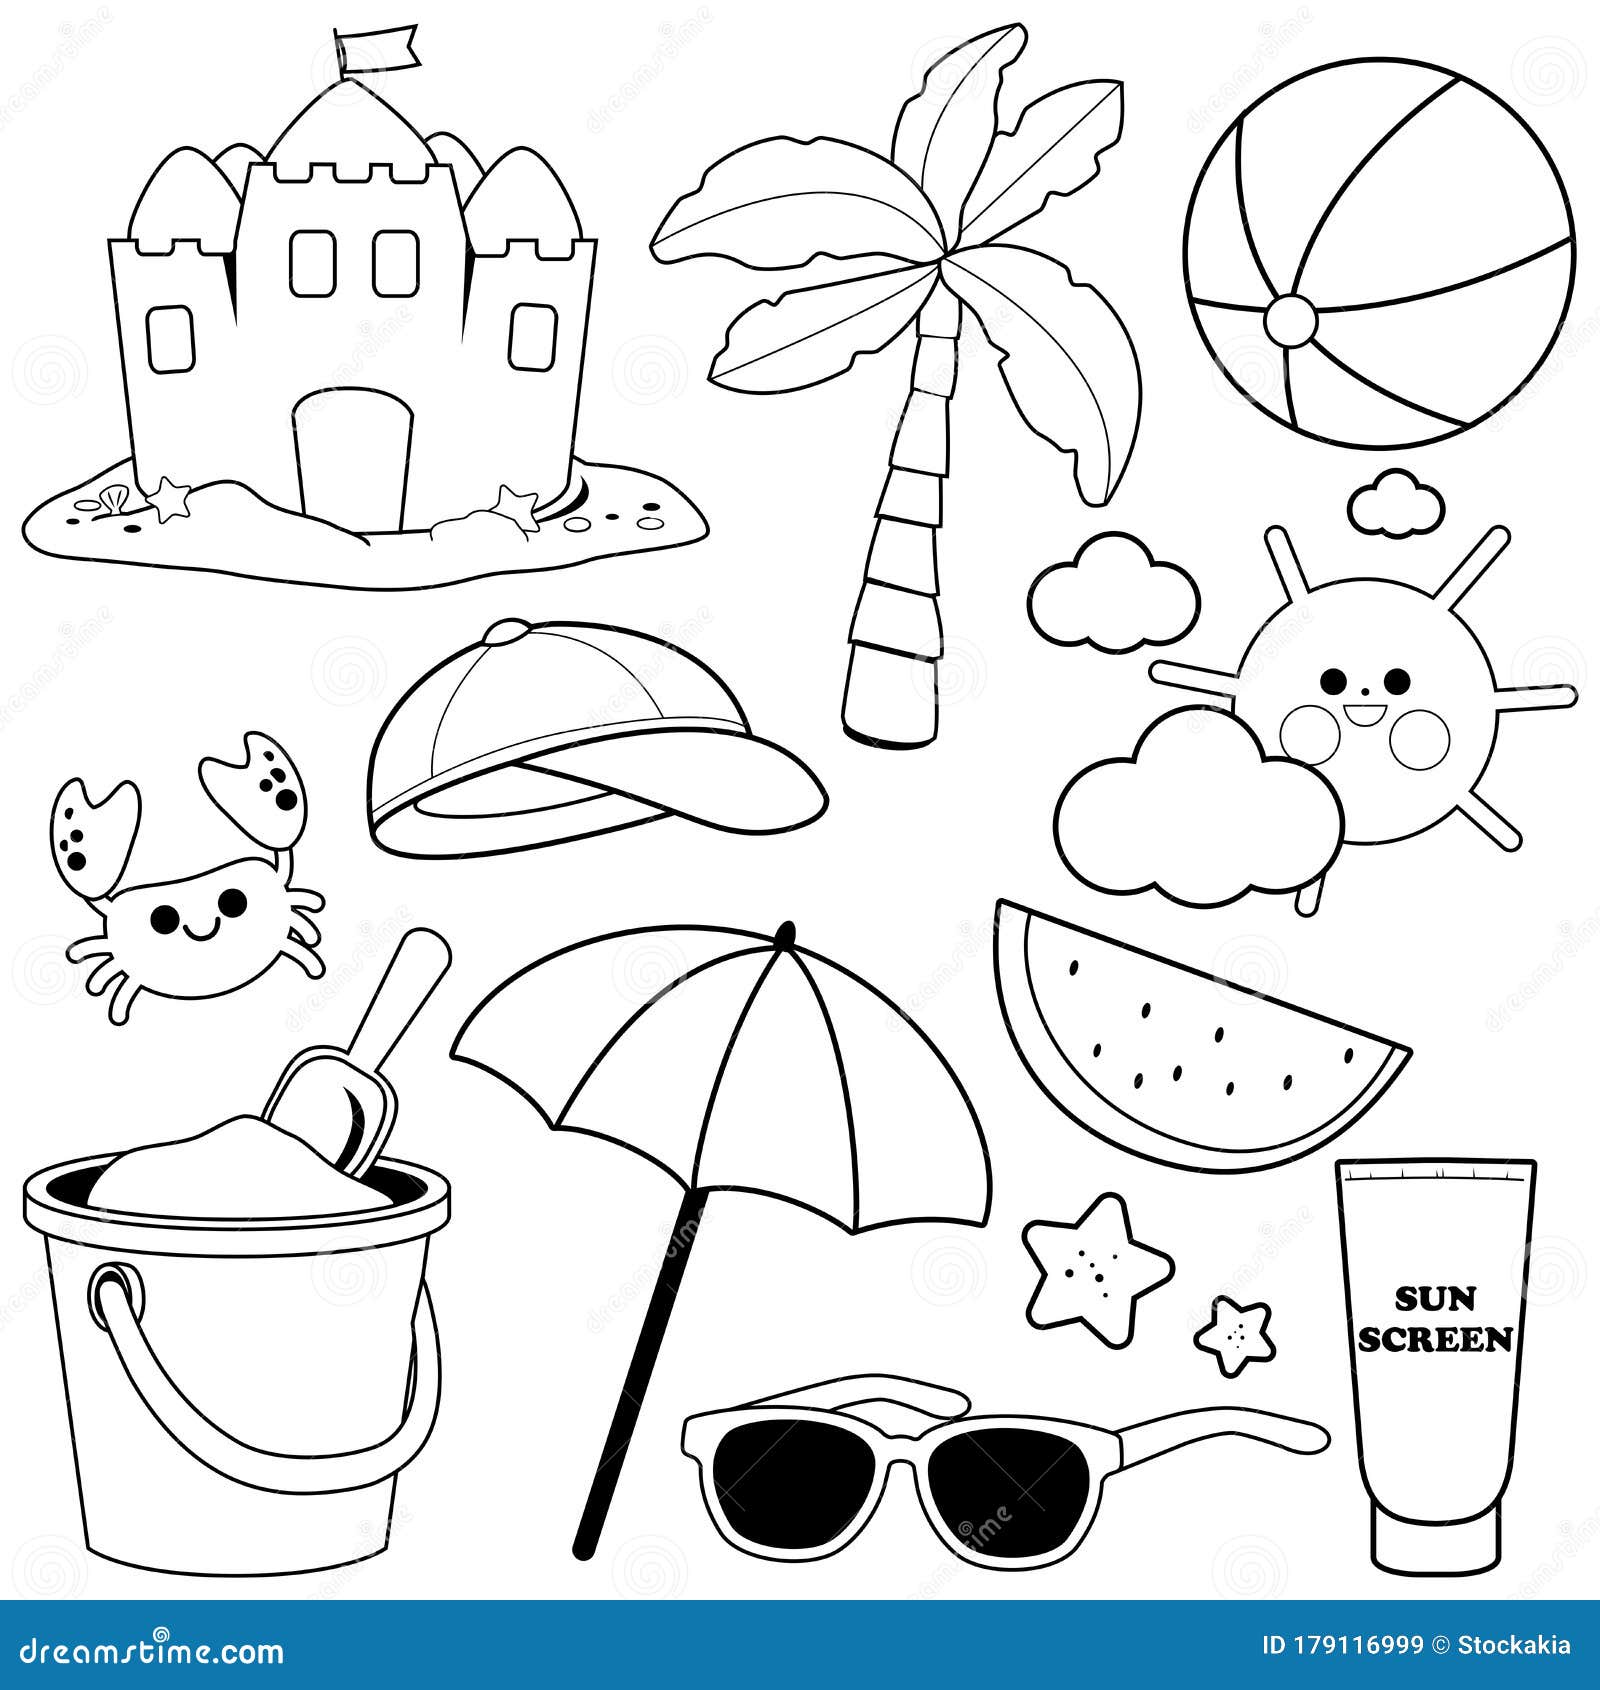 Summer Coloring Page For Adult Royalty-Free Stock Photography ...